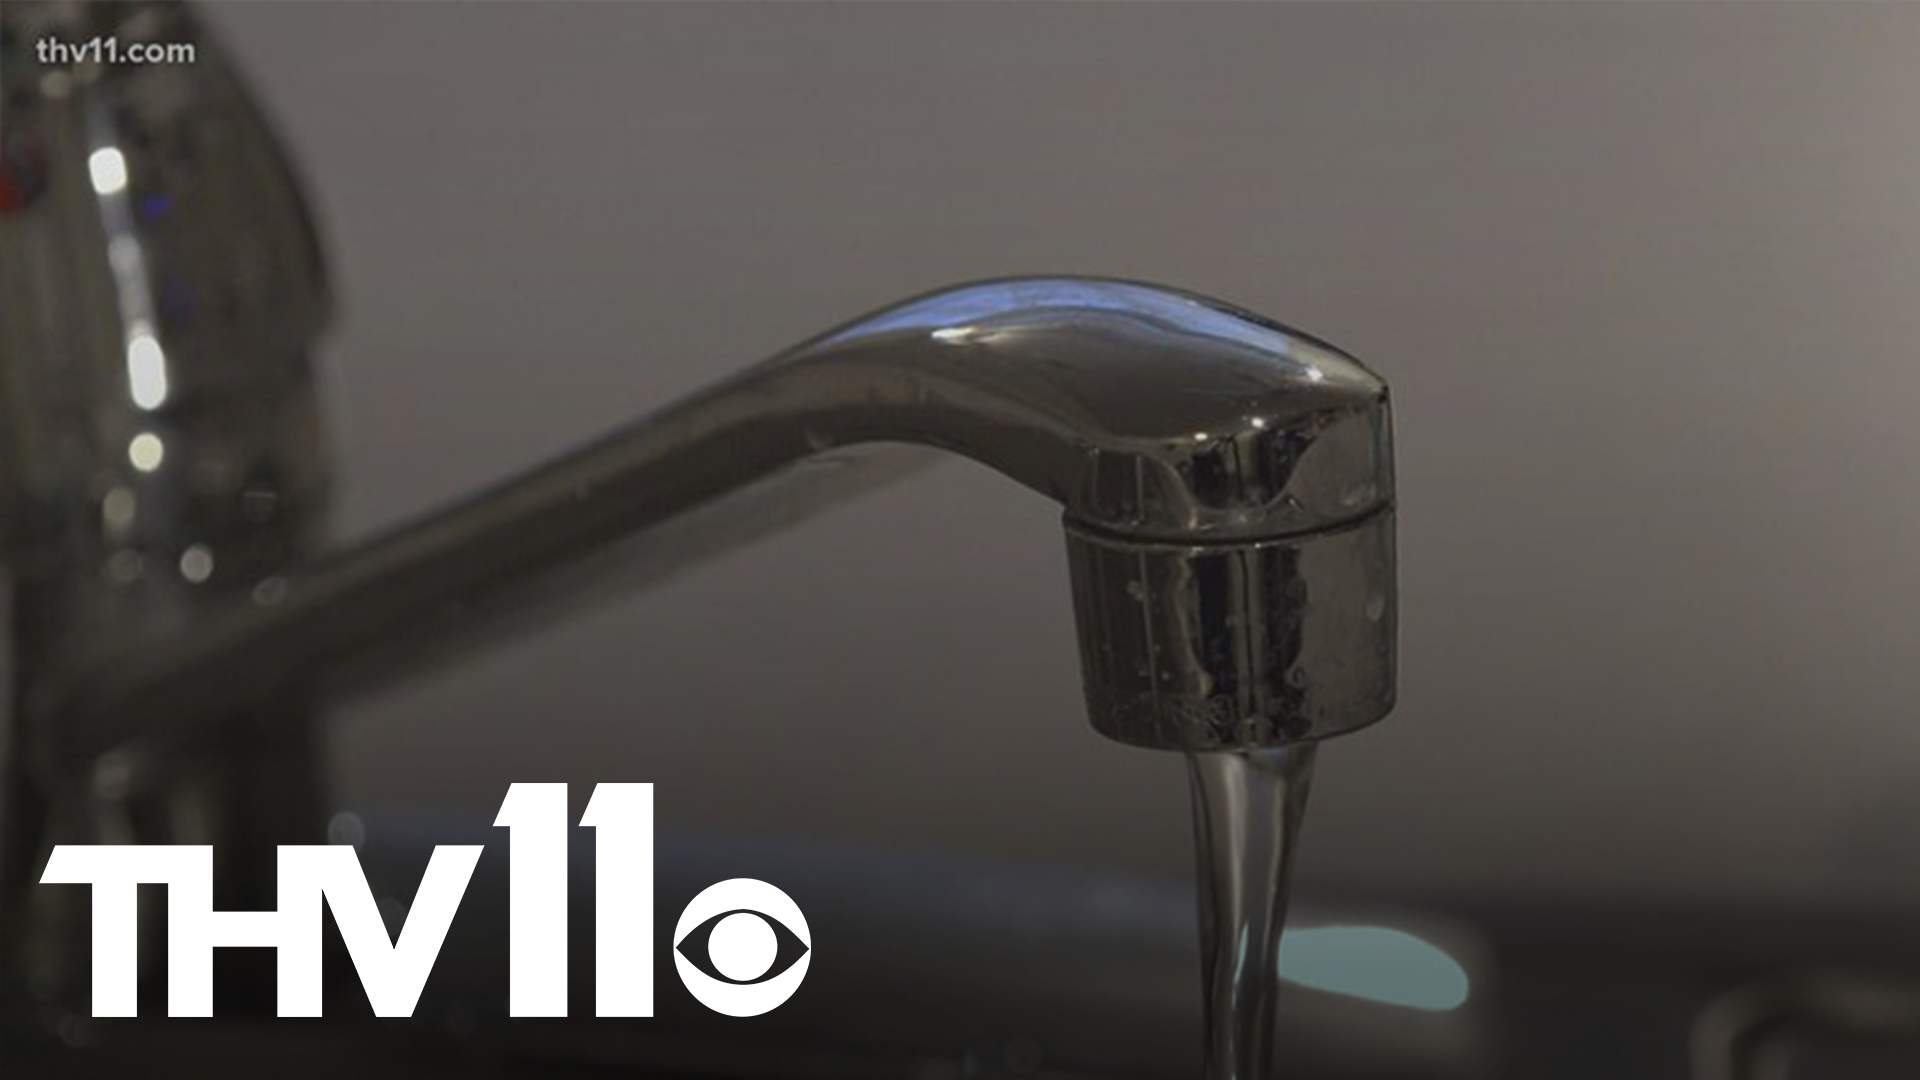 Plumbing experts say one of the best things you can do is leave all your faucets dripping -- that includes your shower.